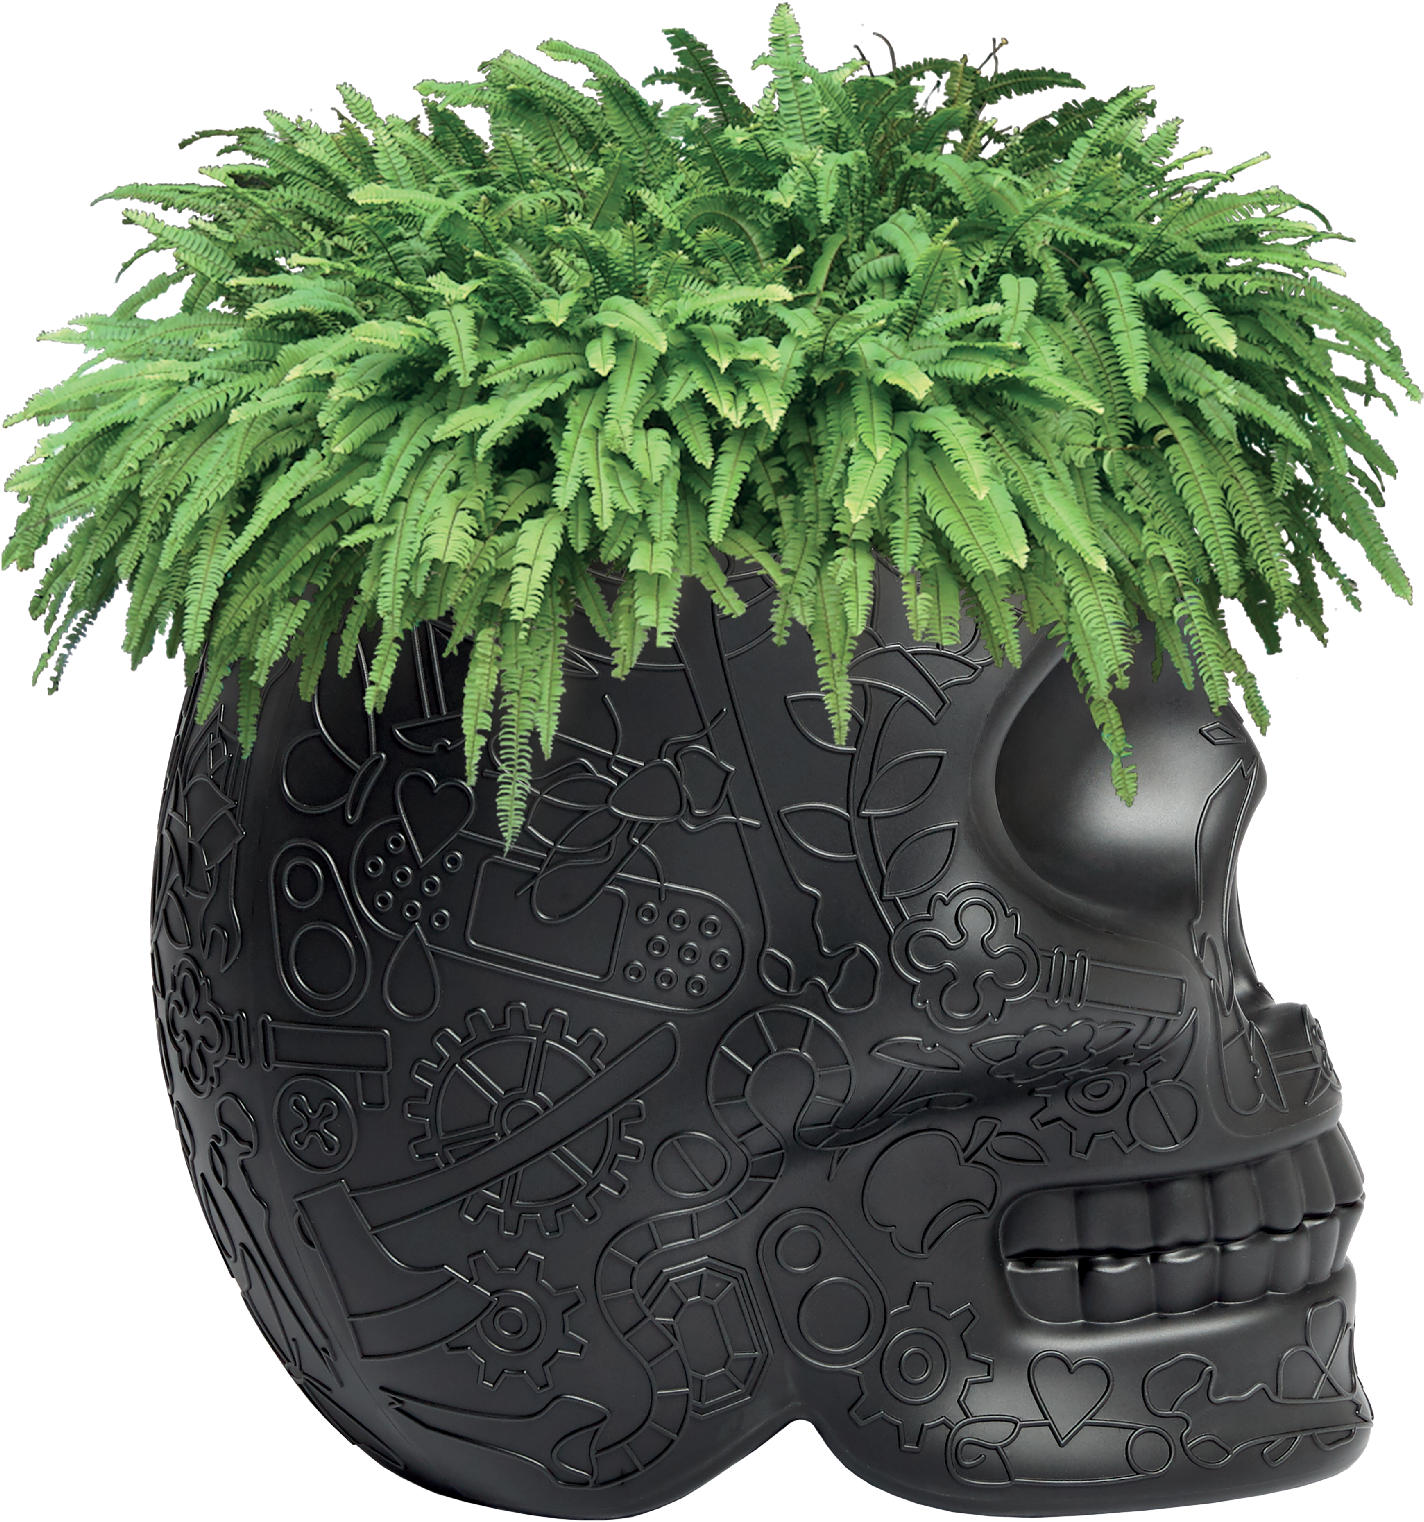 Steampunk Skull Planterwith Ferns PNG image